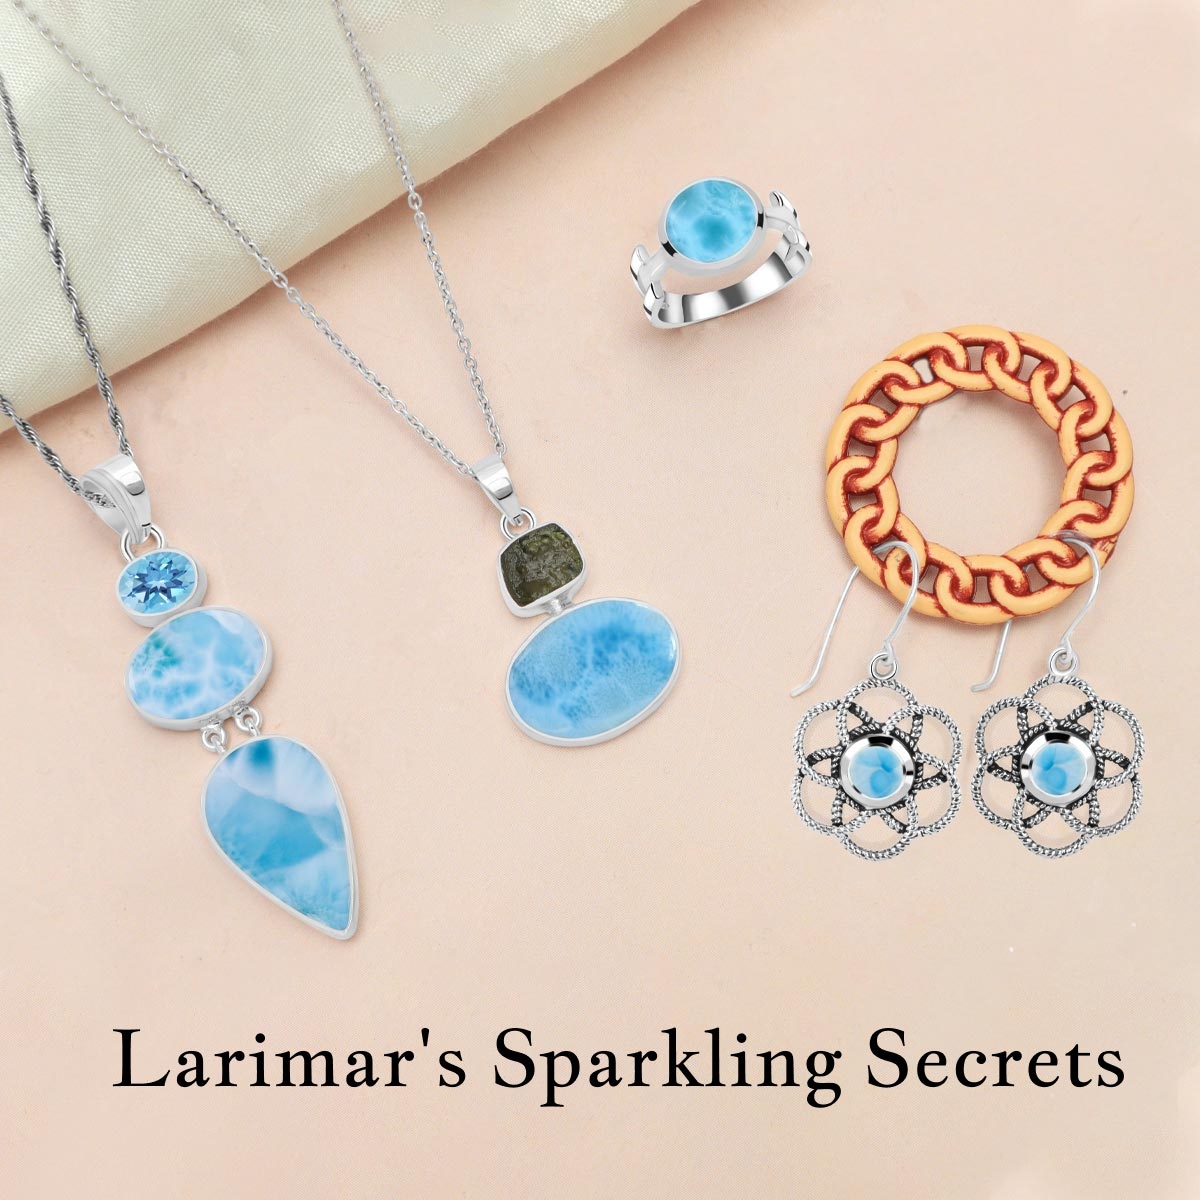 How Do You Care For and Clean Larimar Jewelry